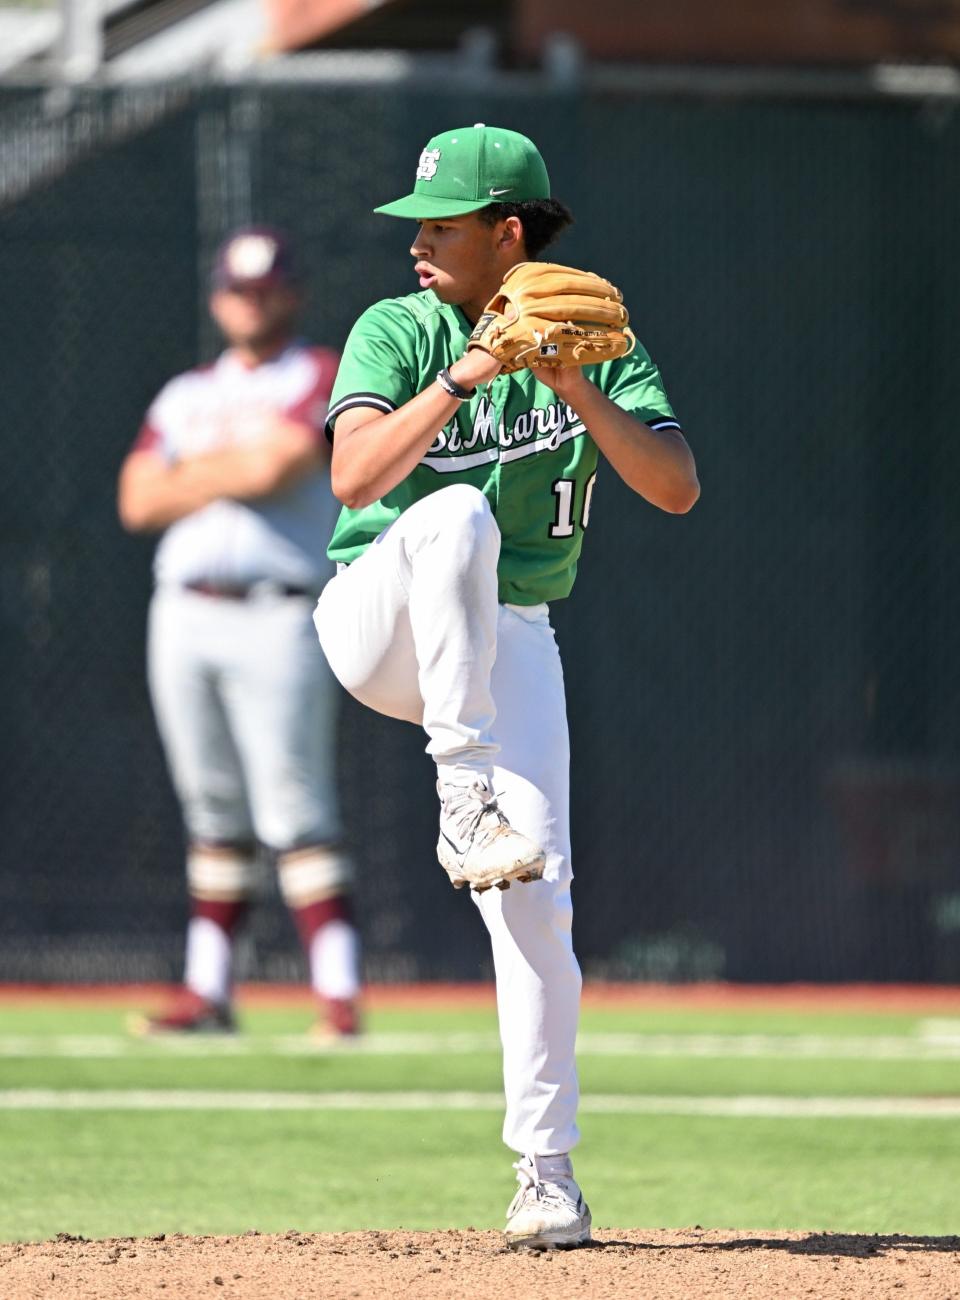 Michael Quedens of St. Mary's baseball prepares to throw a pitch during one of the Rams' game in the 2022-23 season.